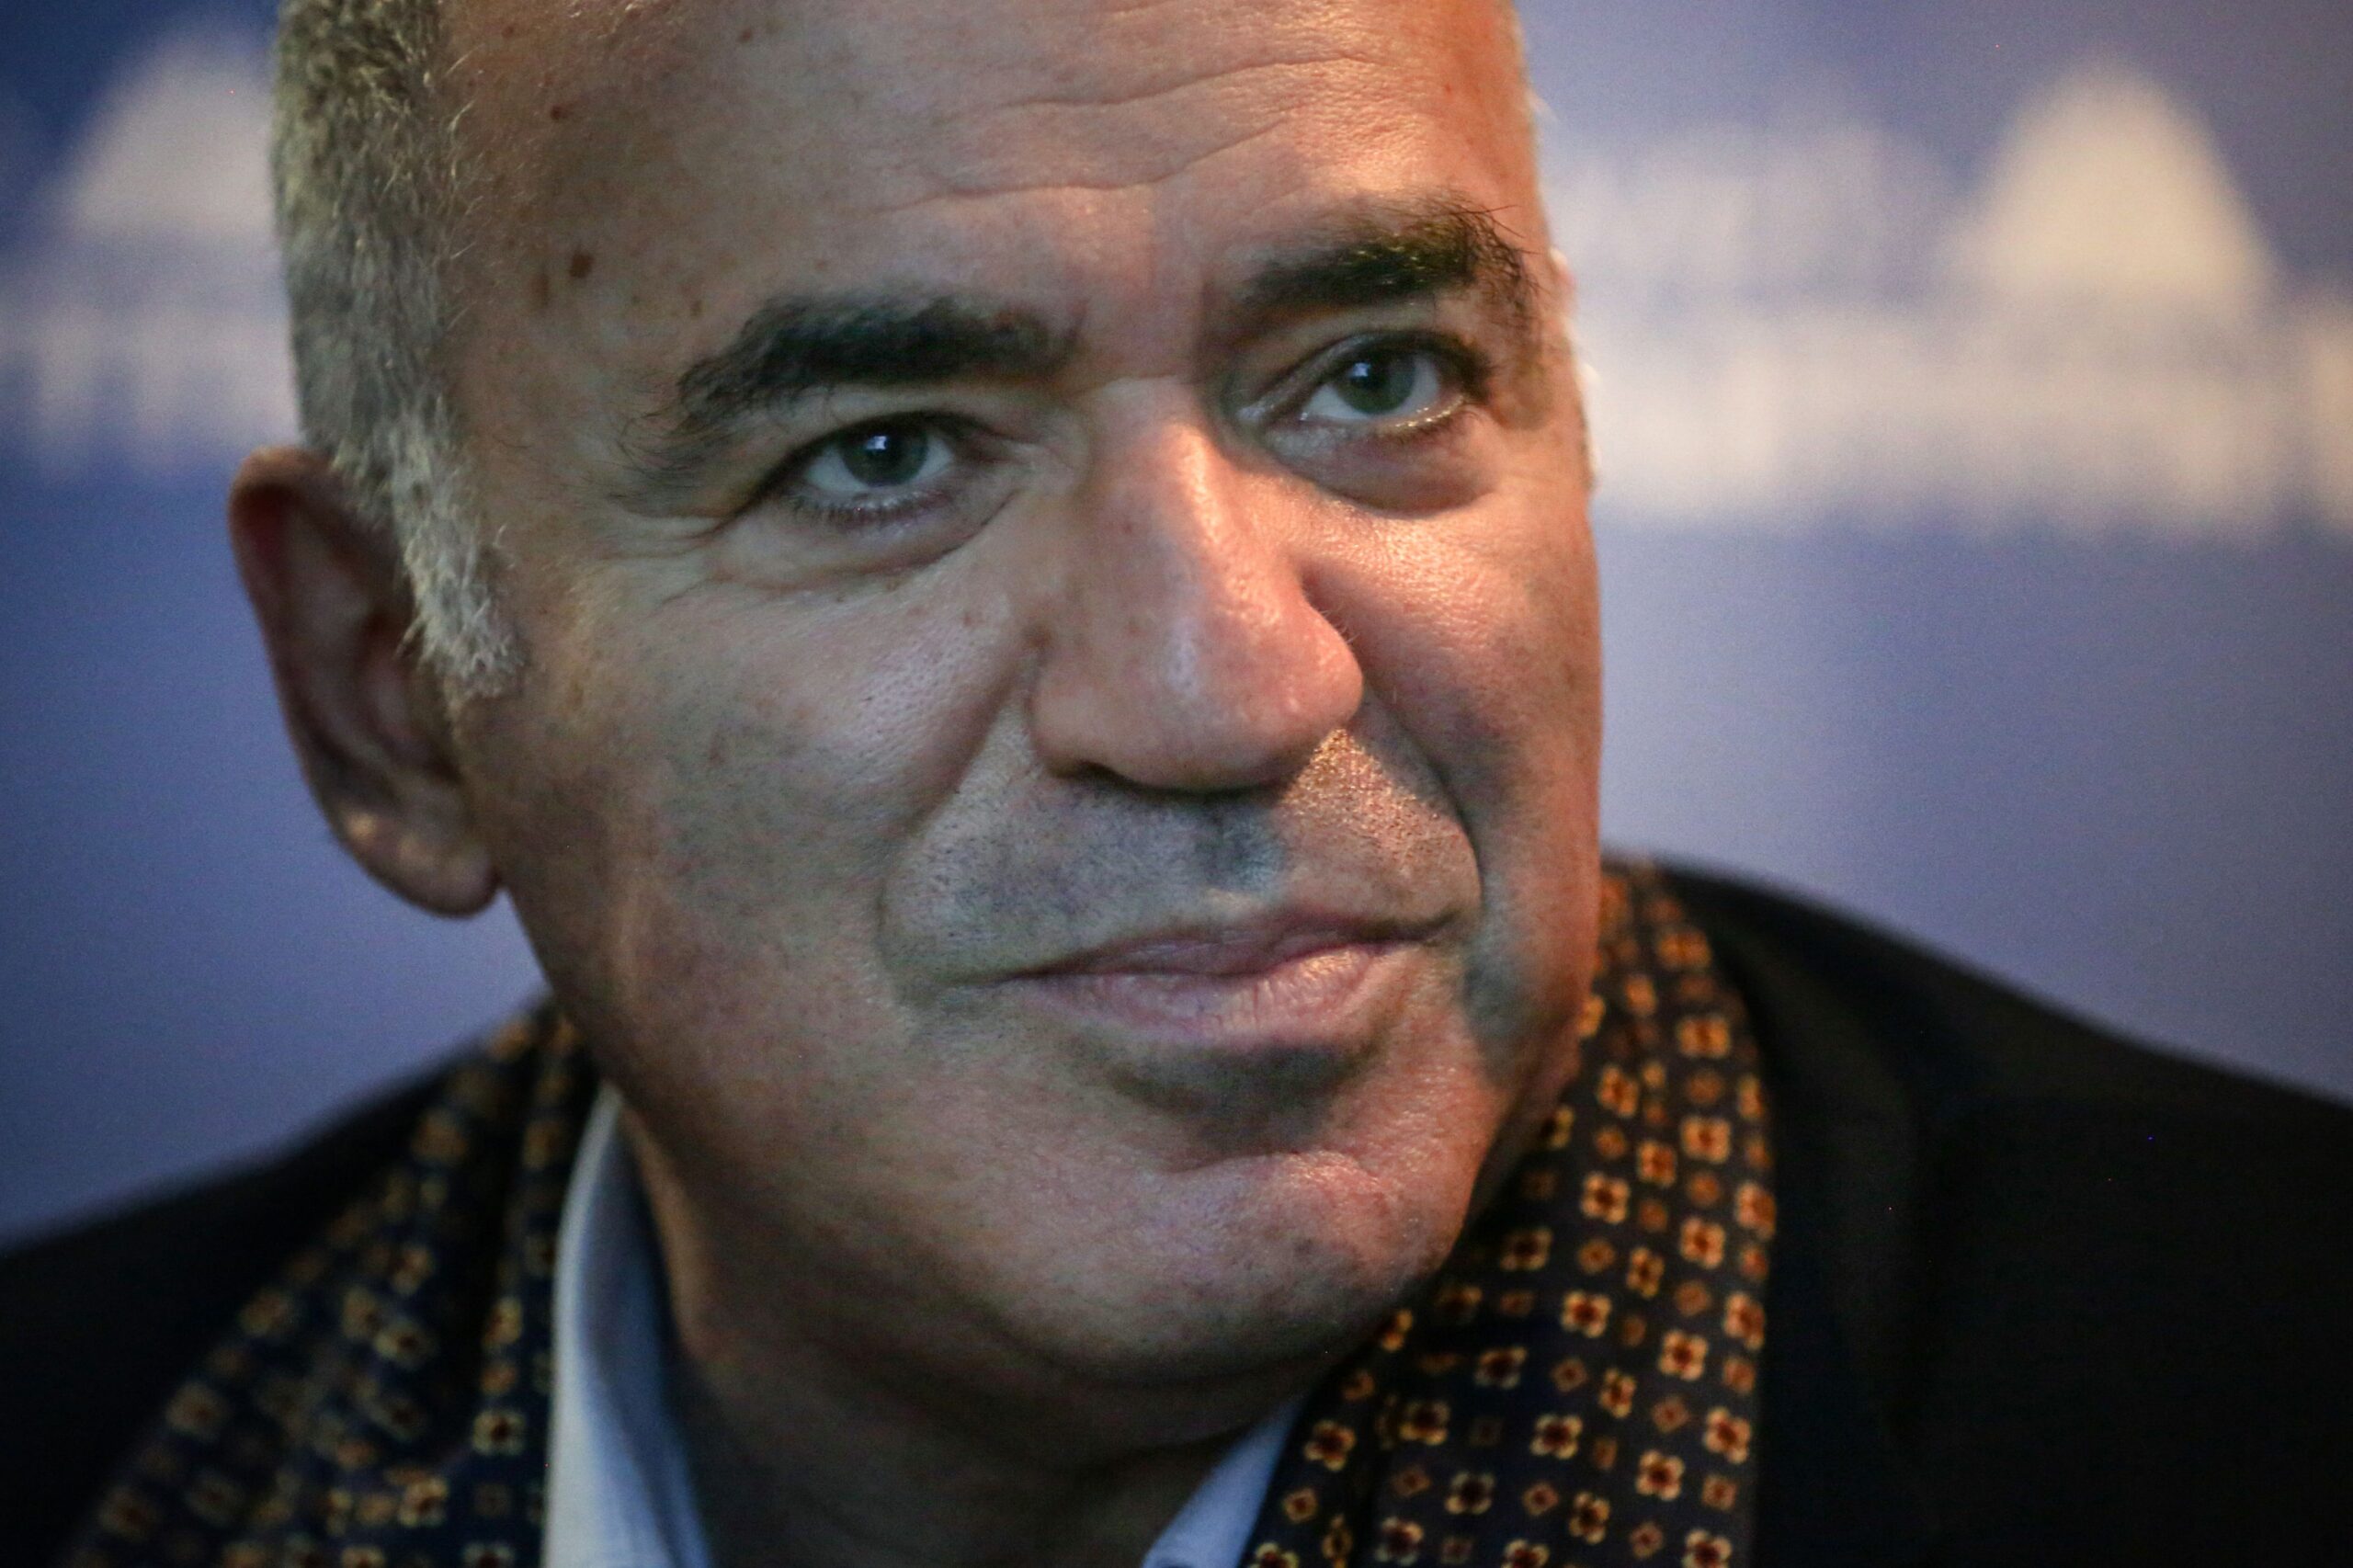 Garry Kasparov Offers ‘Children’s Textbook’ For What the Media Should Actually Call Putin’s Ukraine ‘Peacekeepers’